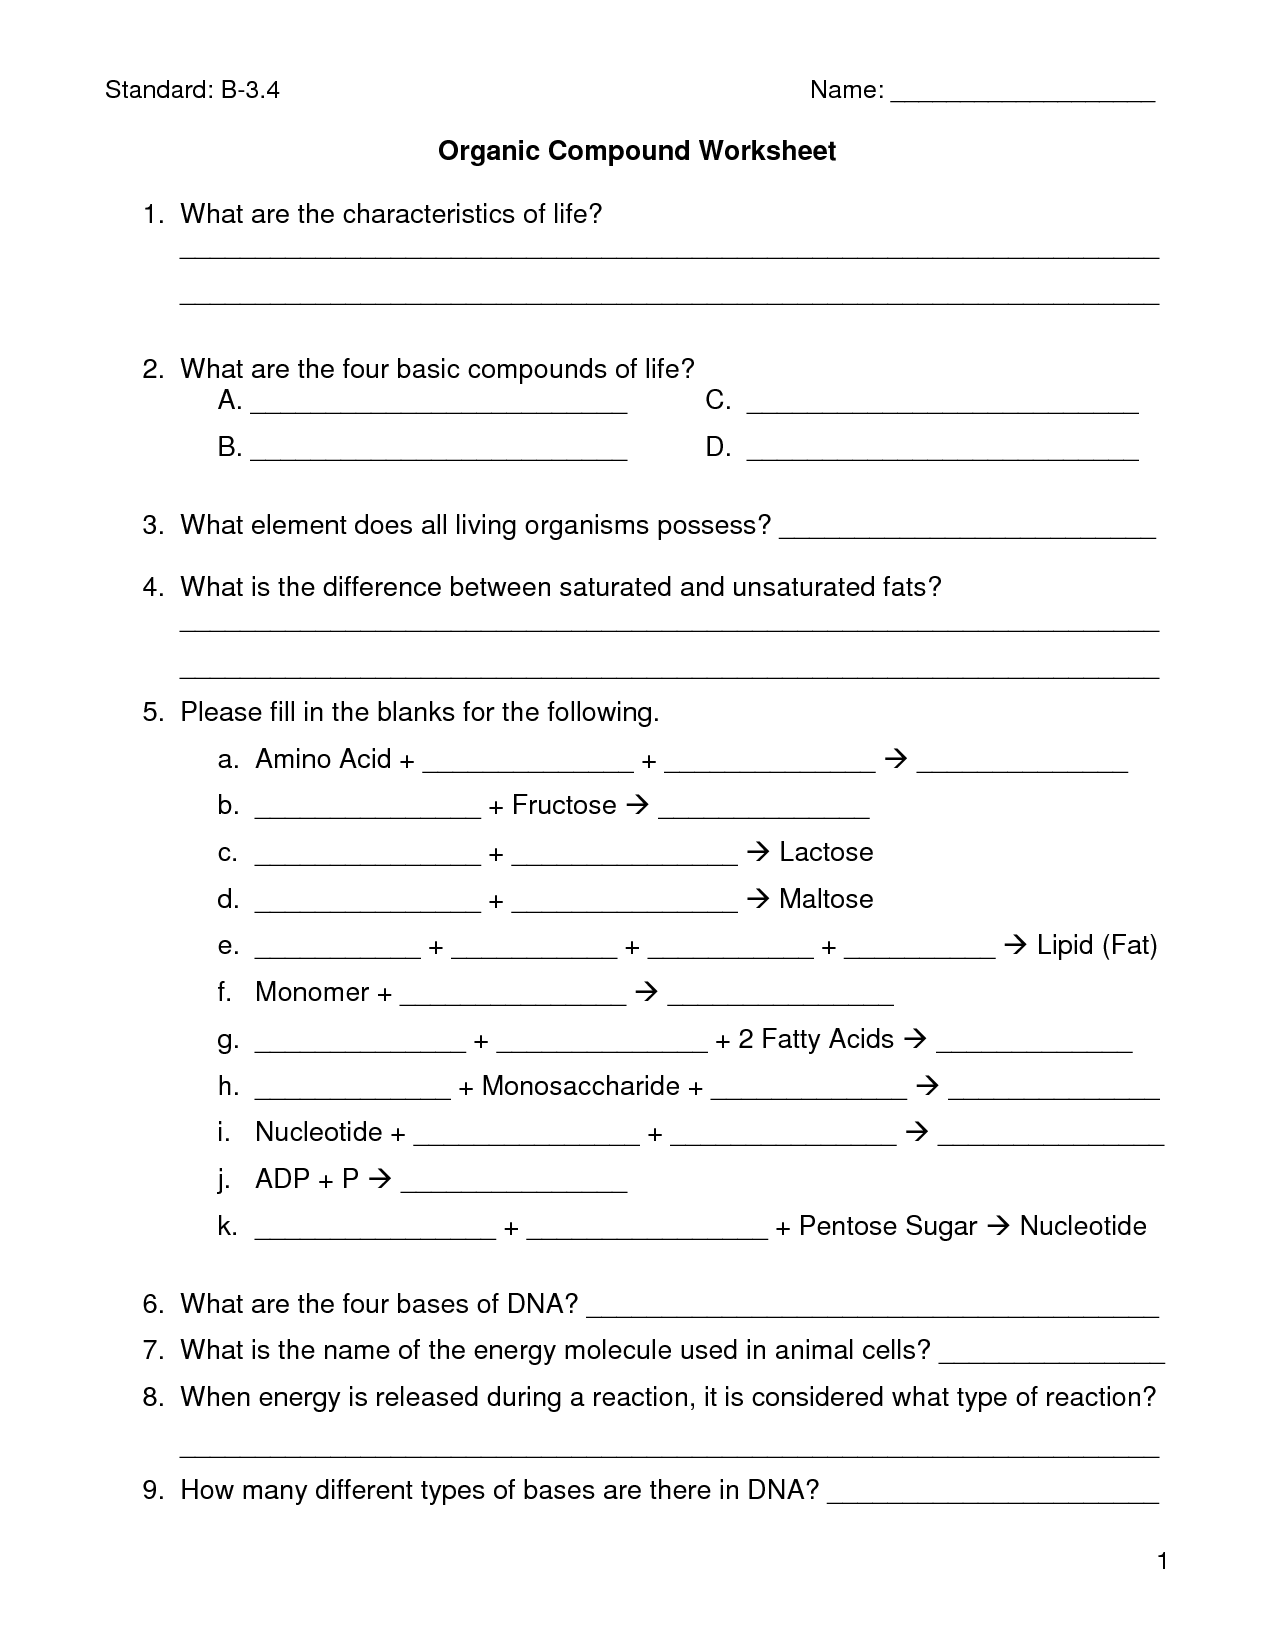 18 Best Images of Organic Molecules Worksheet Answers  Organic Compounds Worksheet, Naming 